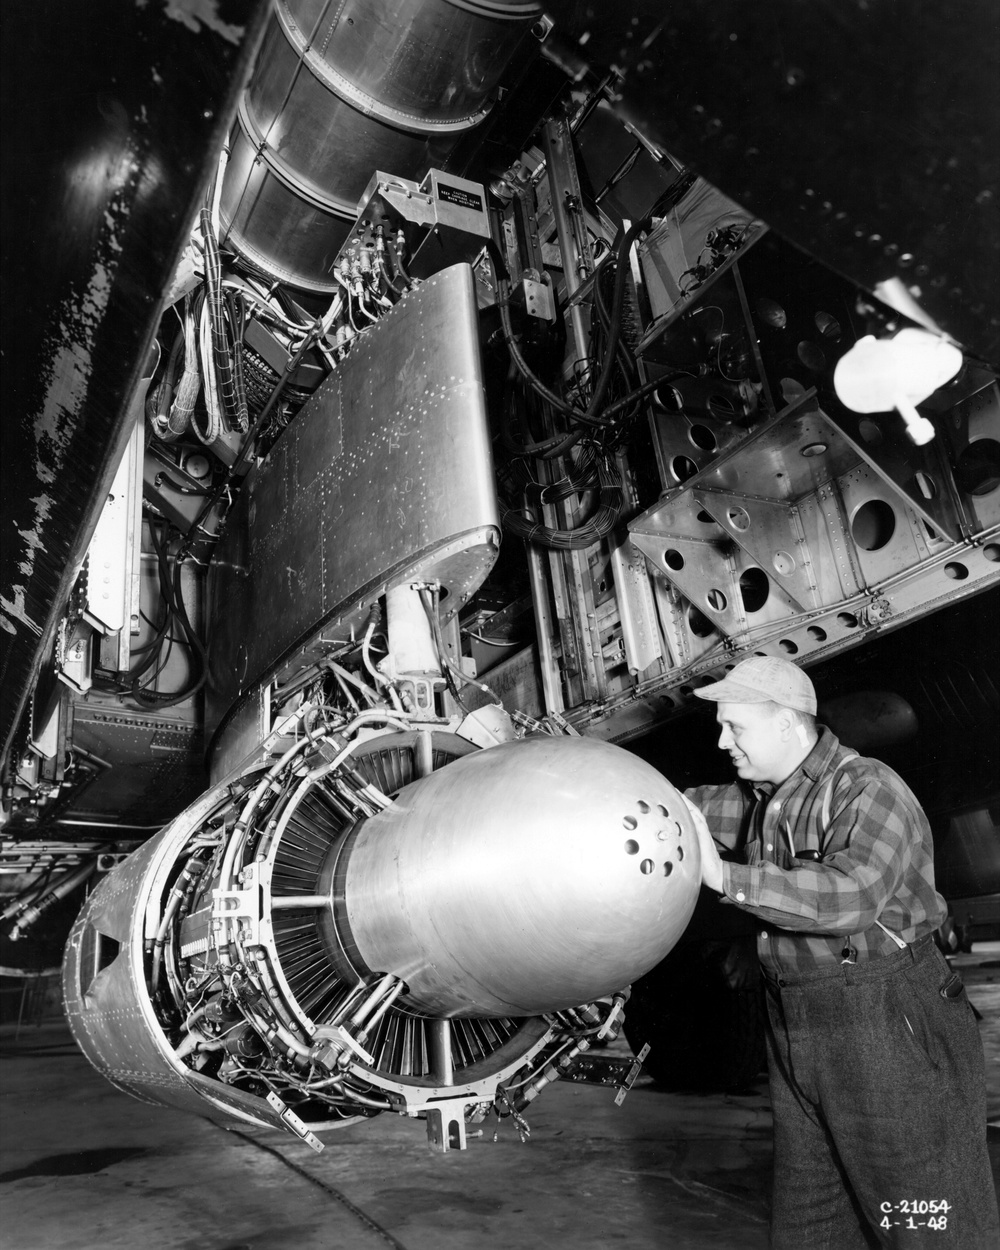 TG-180 ENGINE IN B-29 AIRPLANE IN PROCESS OF DISASSEMBLY